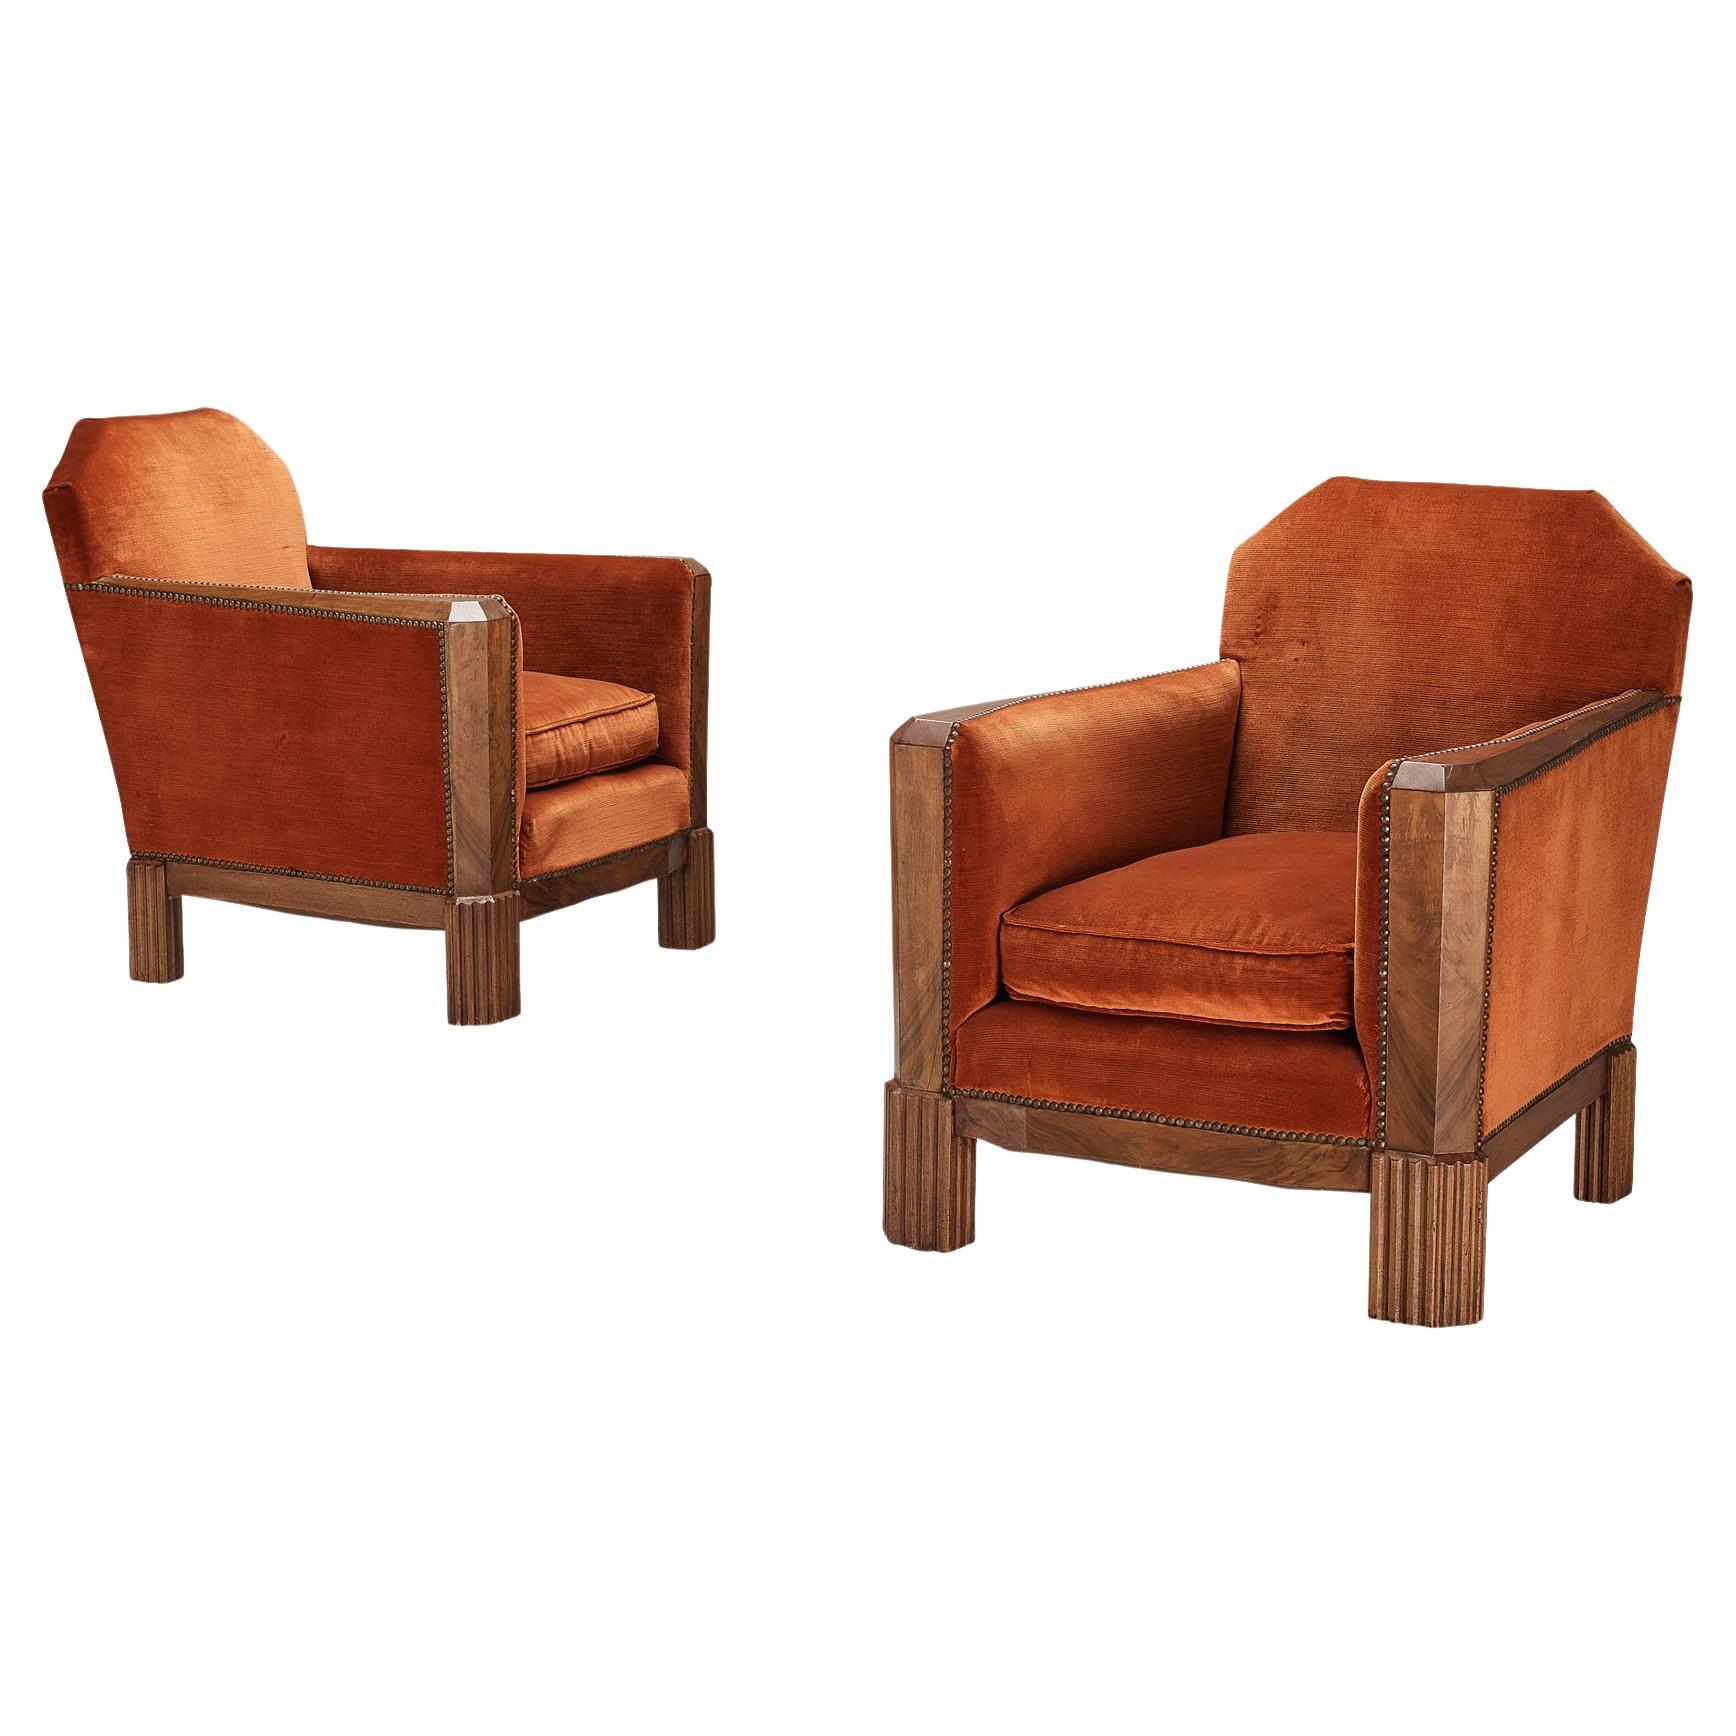 French Art Deco Pair of Lounge Chairs in Orange Corduroy and Walnut  For Sale